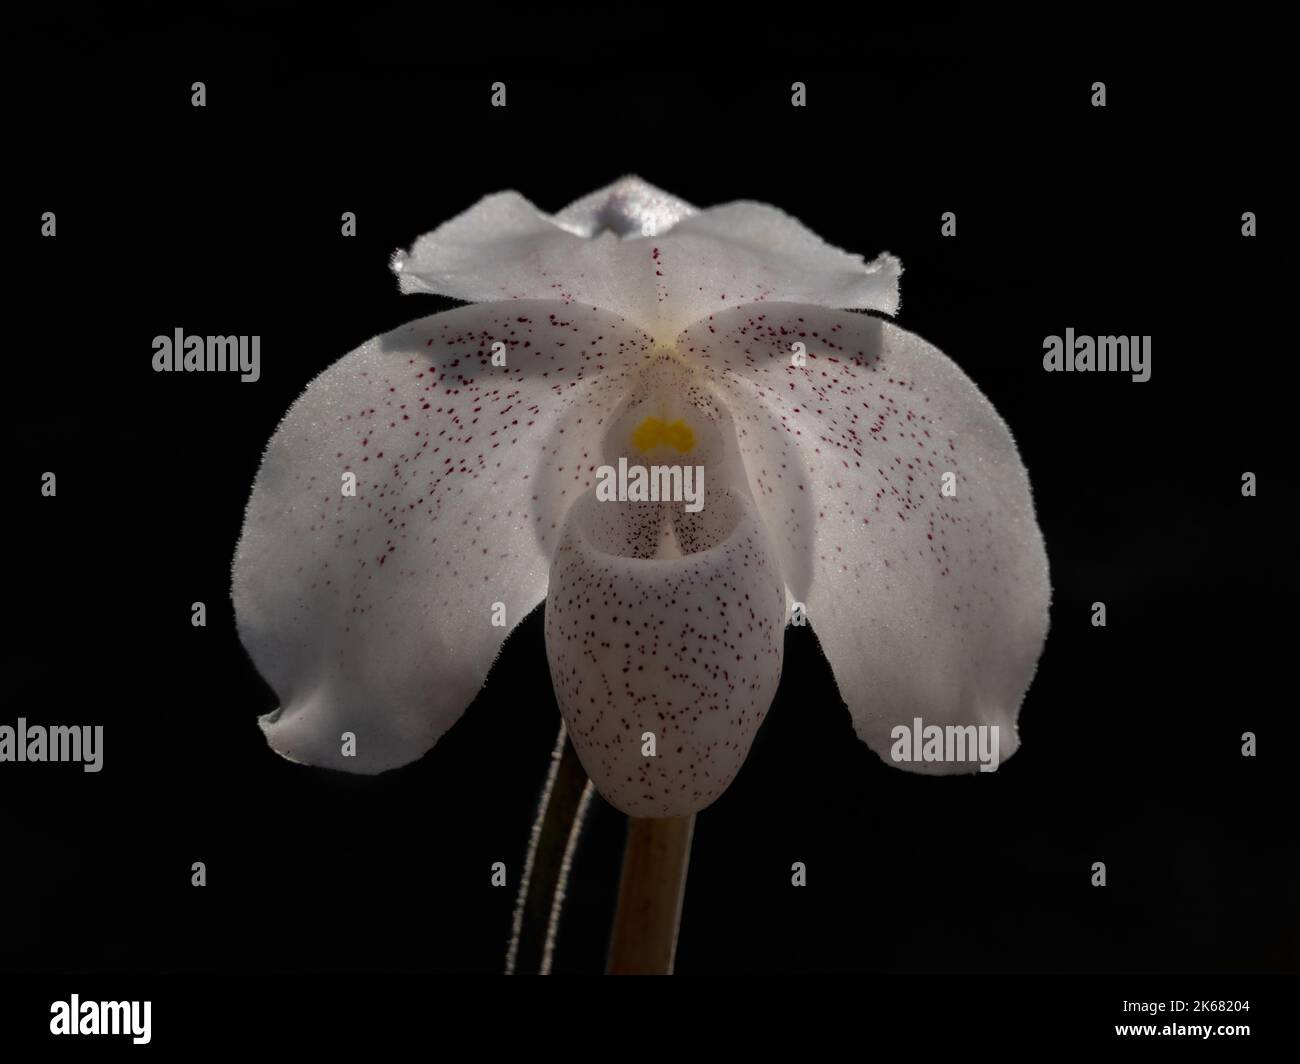 Closeup view of backlit bright white with pink speckles flower of lady slipper orchid species paphiopedilum niveum isolated on black background Stock Photo